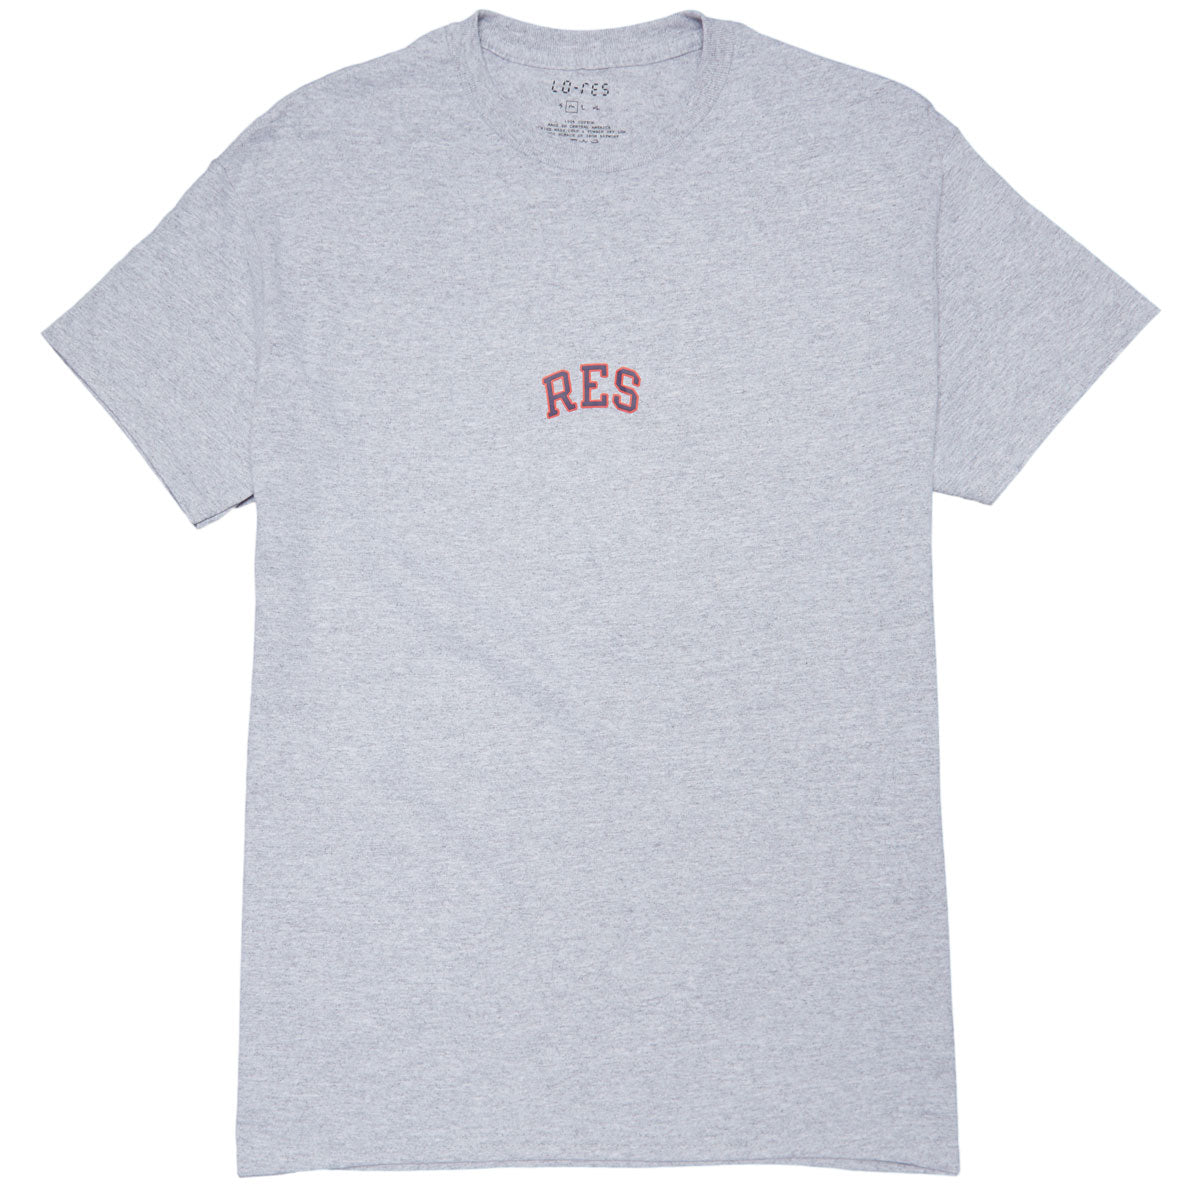 Lo-Res Ball T-Shirt - Heather Grey image 1